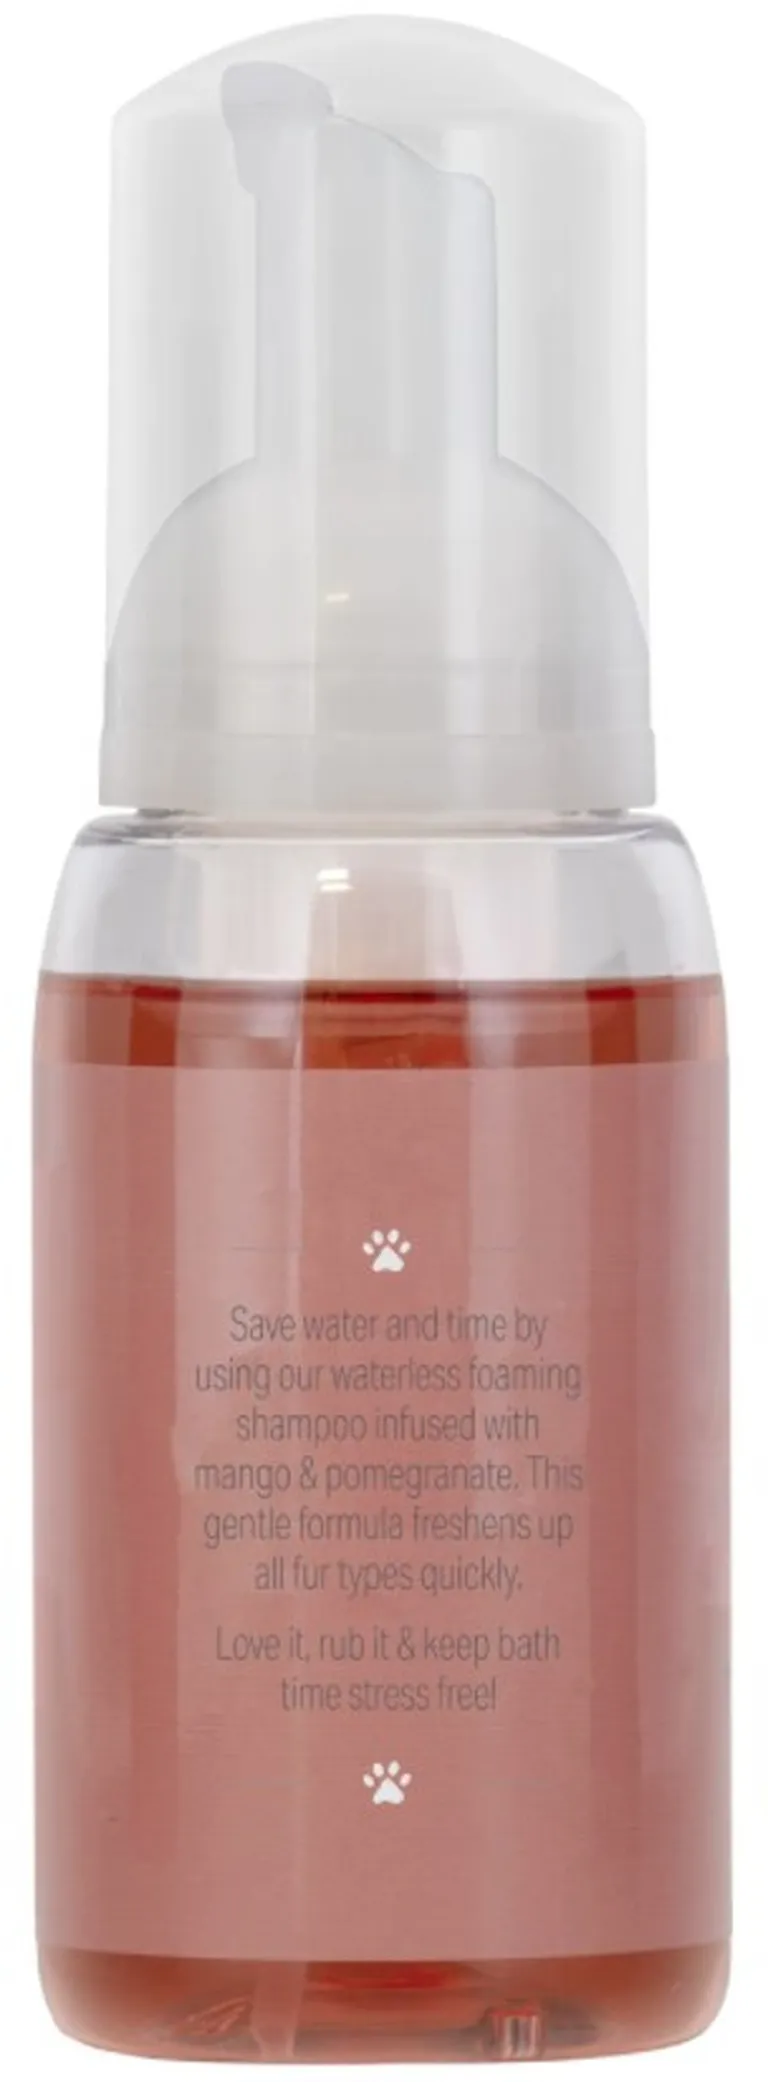 Nilodor Ultra Collection Waterless Foaming Shampoo for Dogs Mango Scent Photo 2